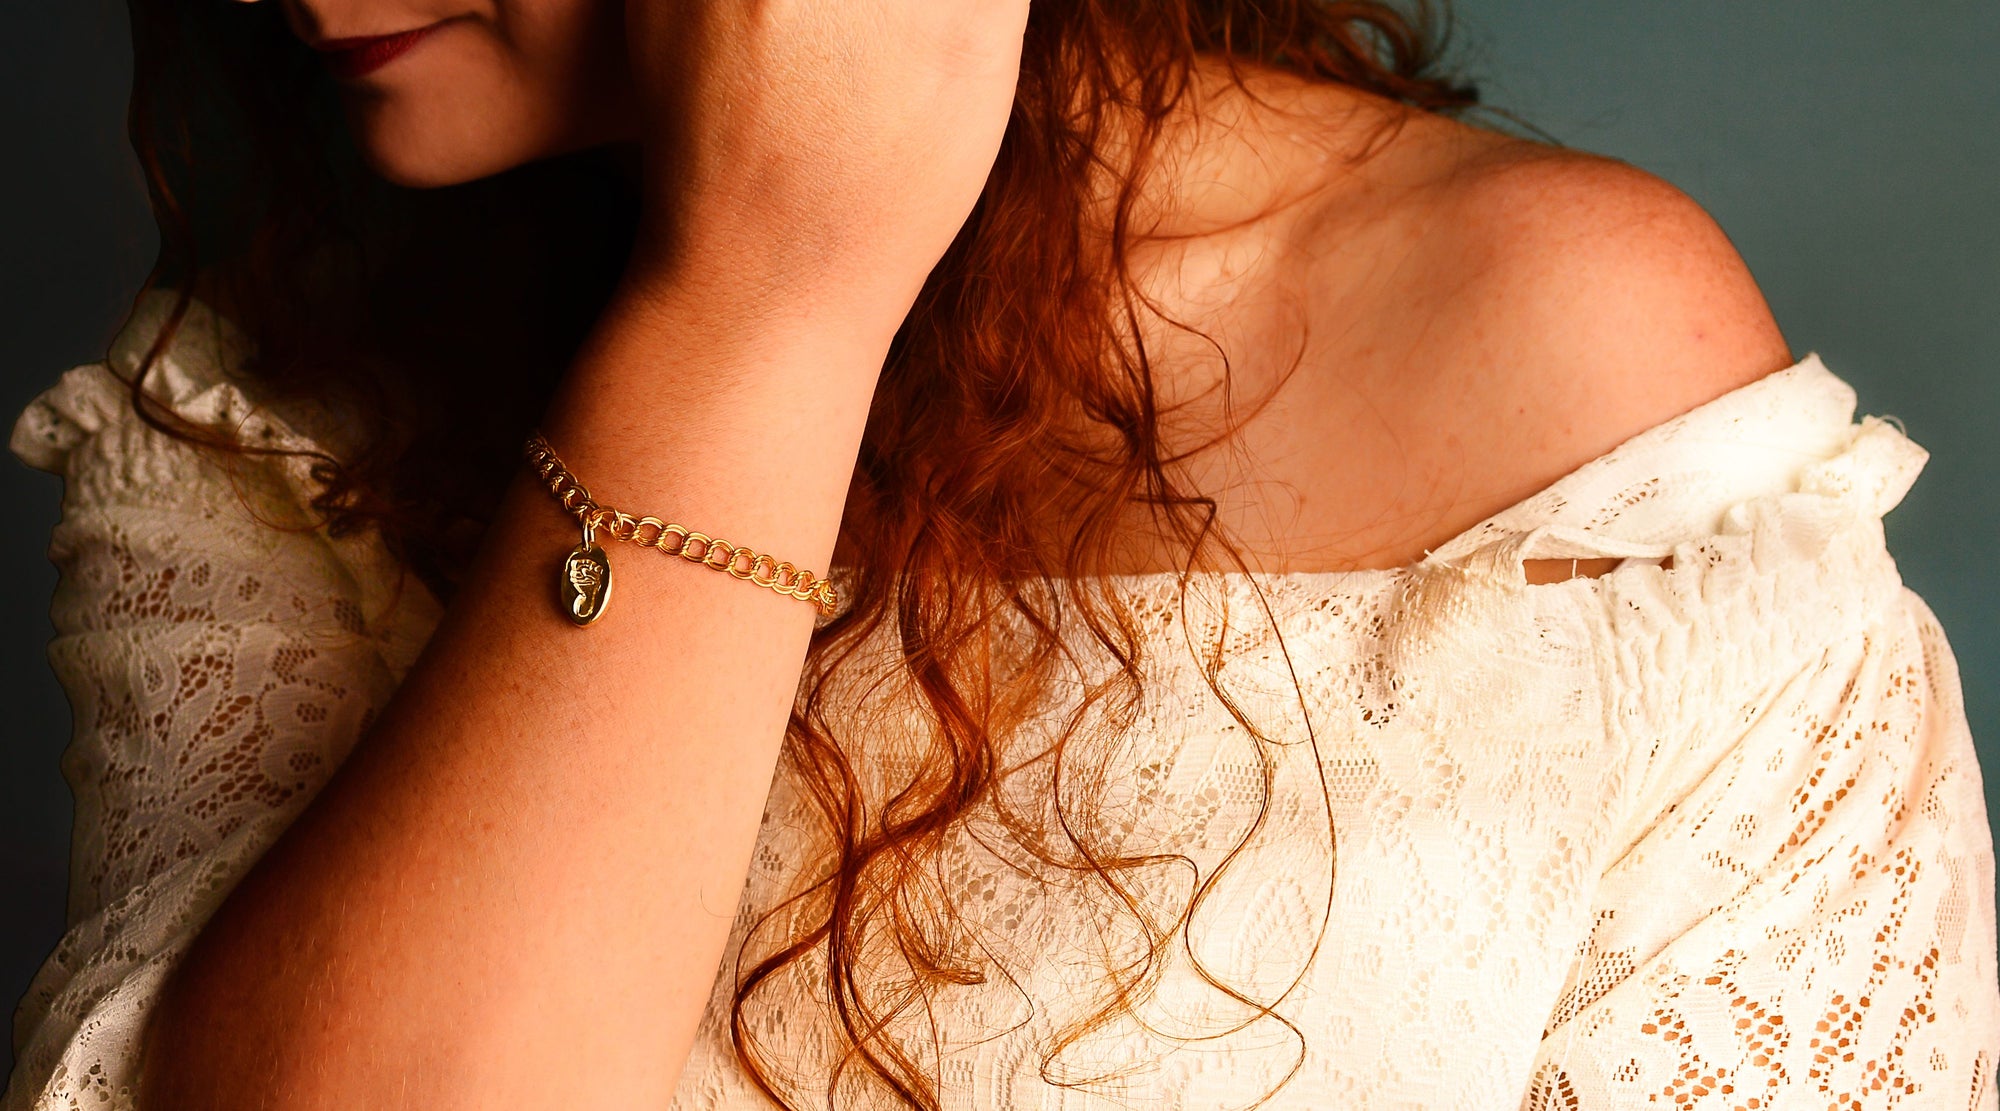 A solid gold baby footprint charm on a gold bracelet.  Worn by a model in a white lace top with a dark teal background behind her.